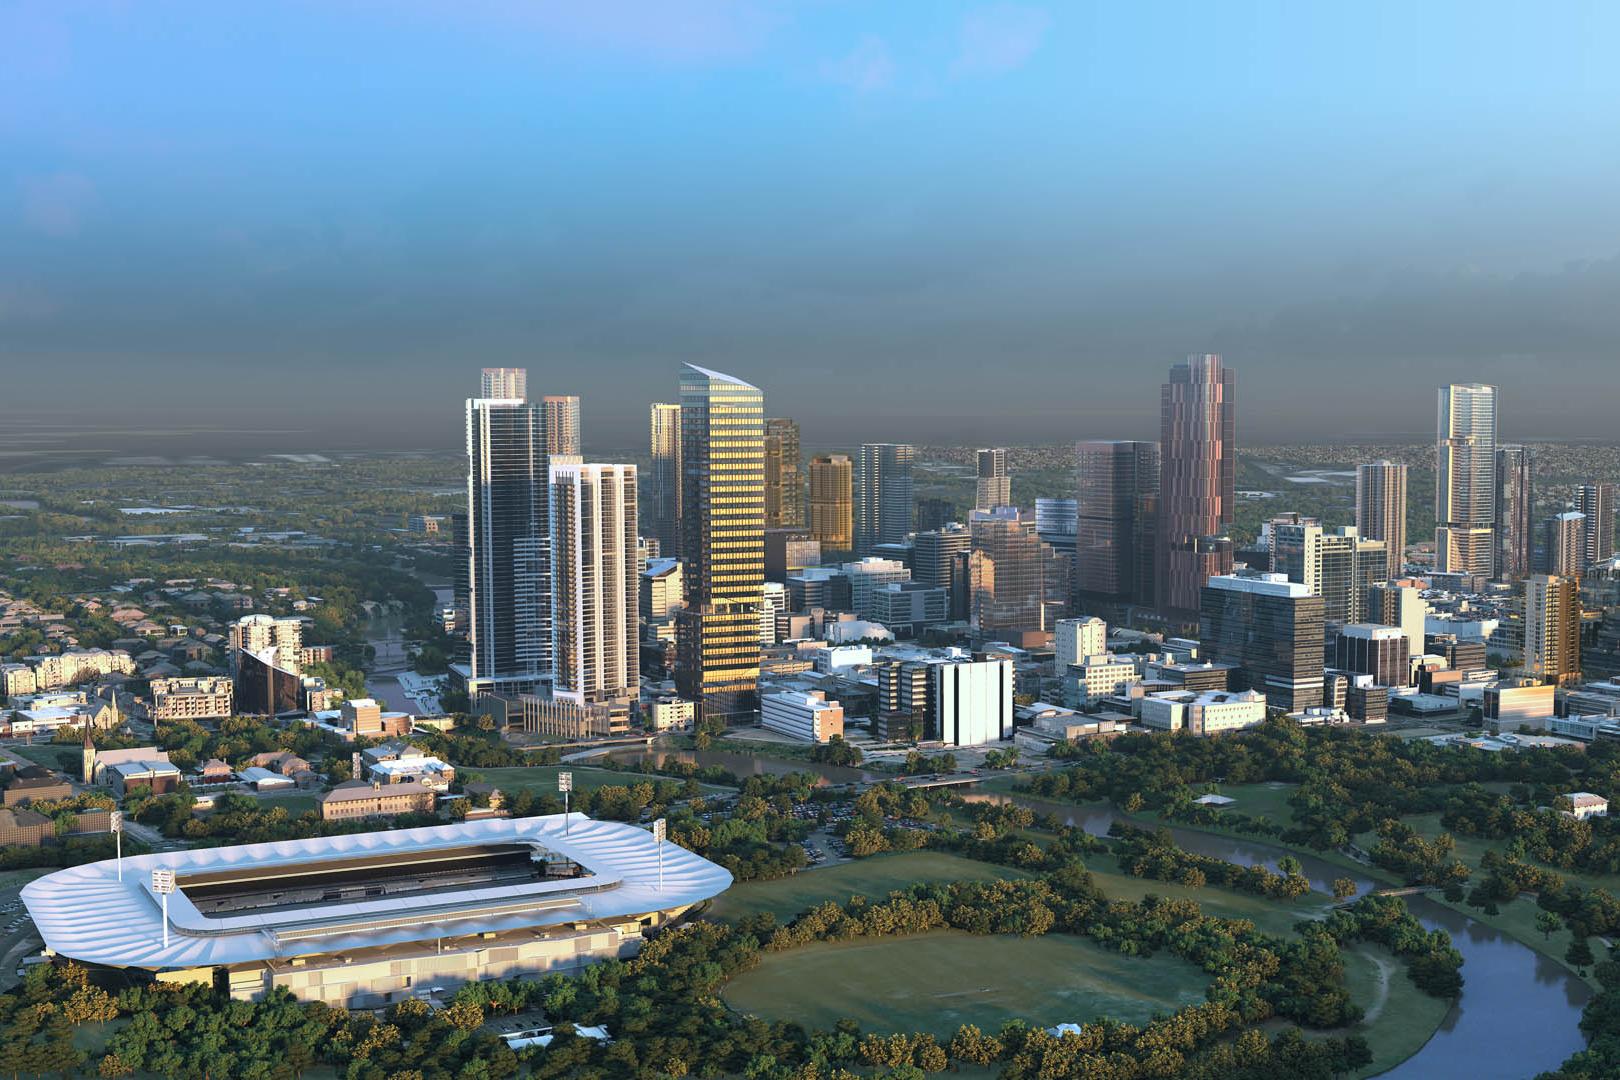 Architects rendering of the City of Parramatta Skyline if all current development approvals and design awards are constructed. Illustrated is the city at dusk viewed aerially from the west with the stadium and Parramatta Park in the foreground. The image portrays a balance of greenspace and technology. 